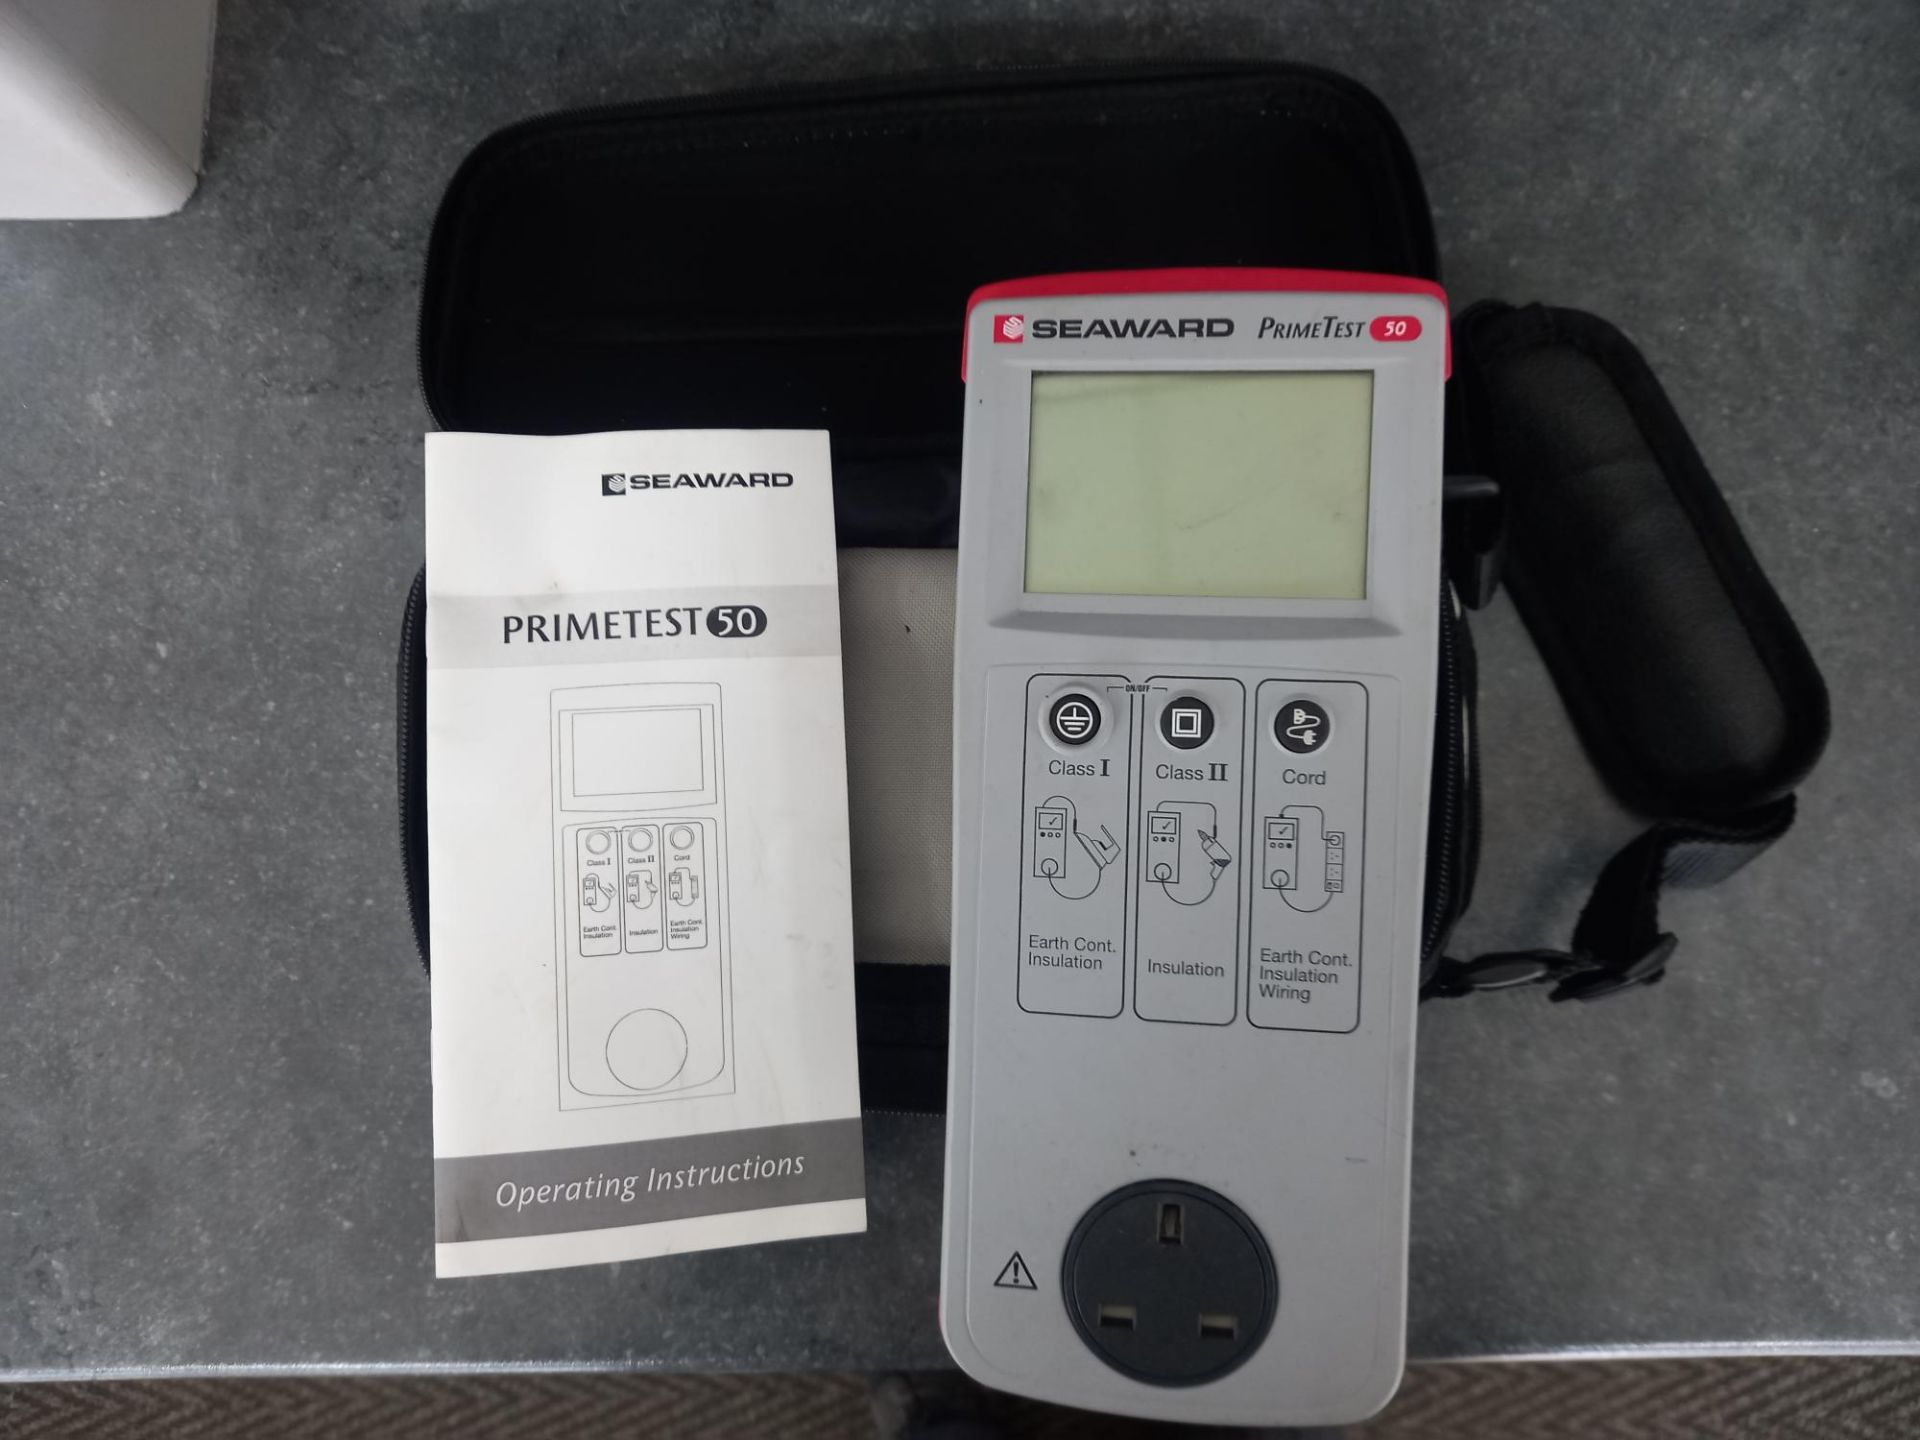 Seaward Primetest 50 - PAT Tester - Small Appliance Safety Tester. Please read the following - Image 2 of 2